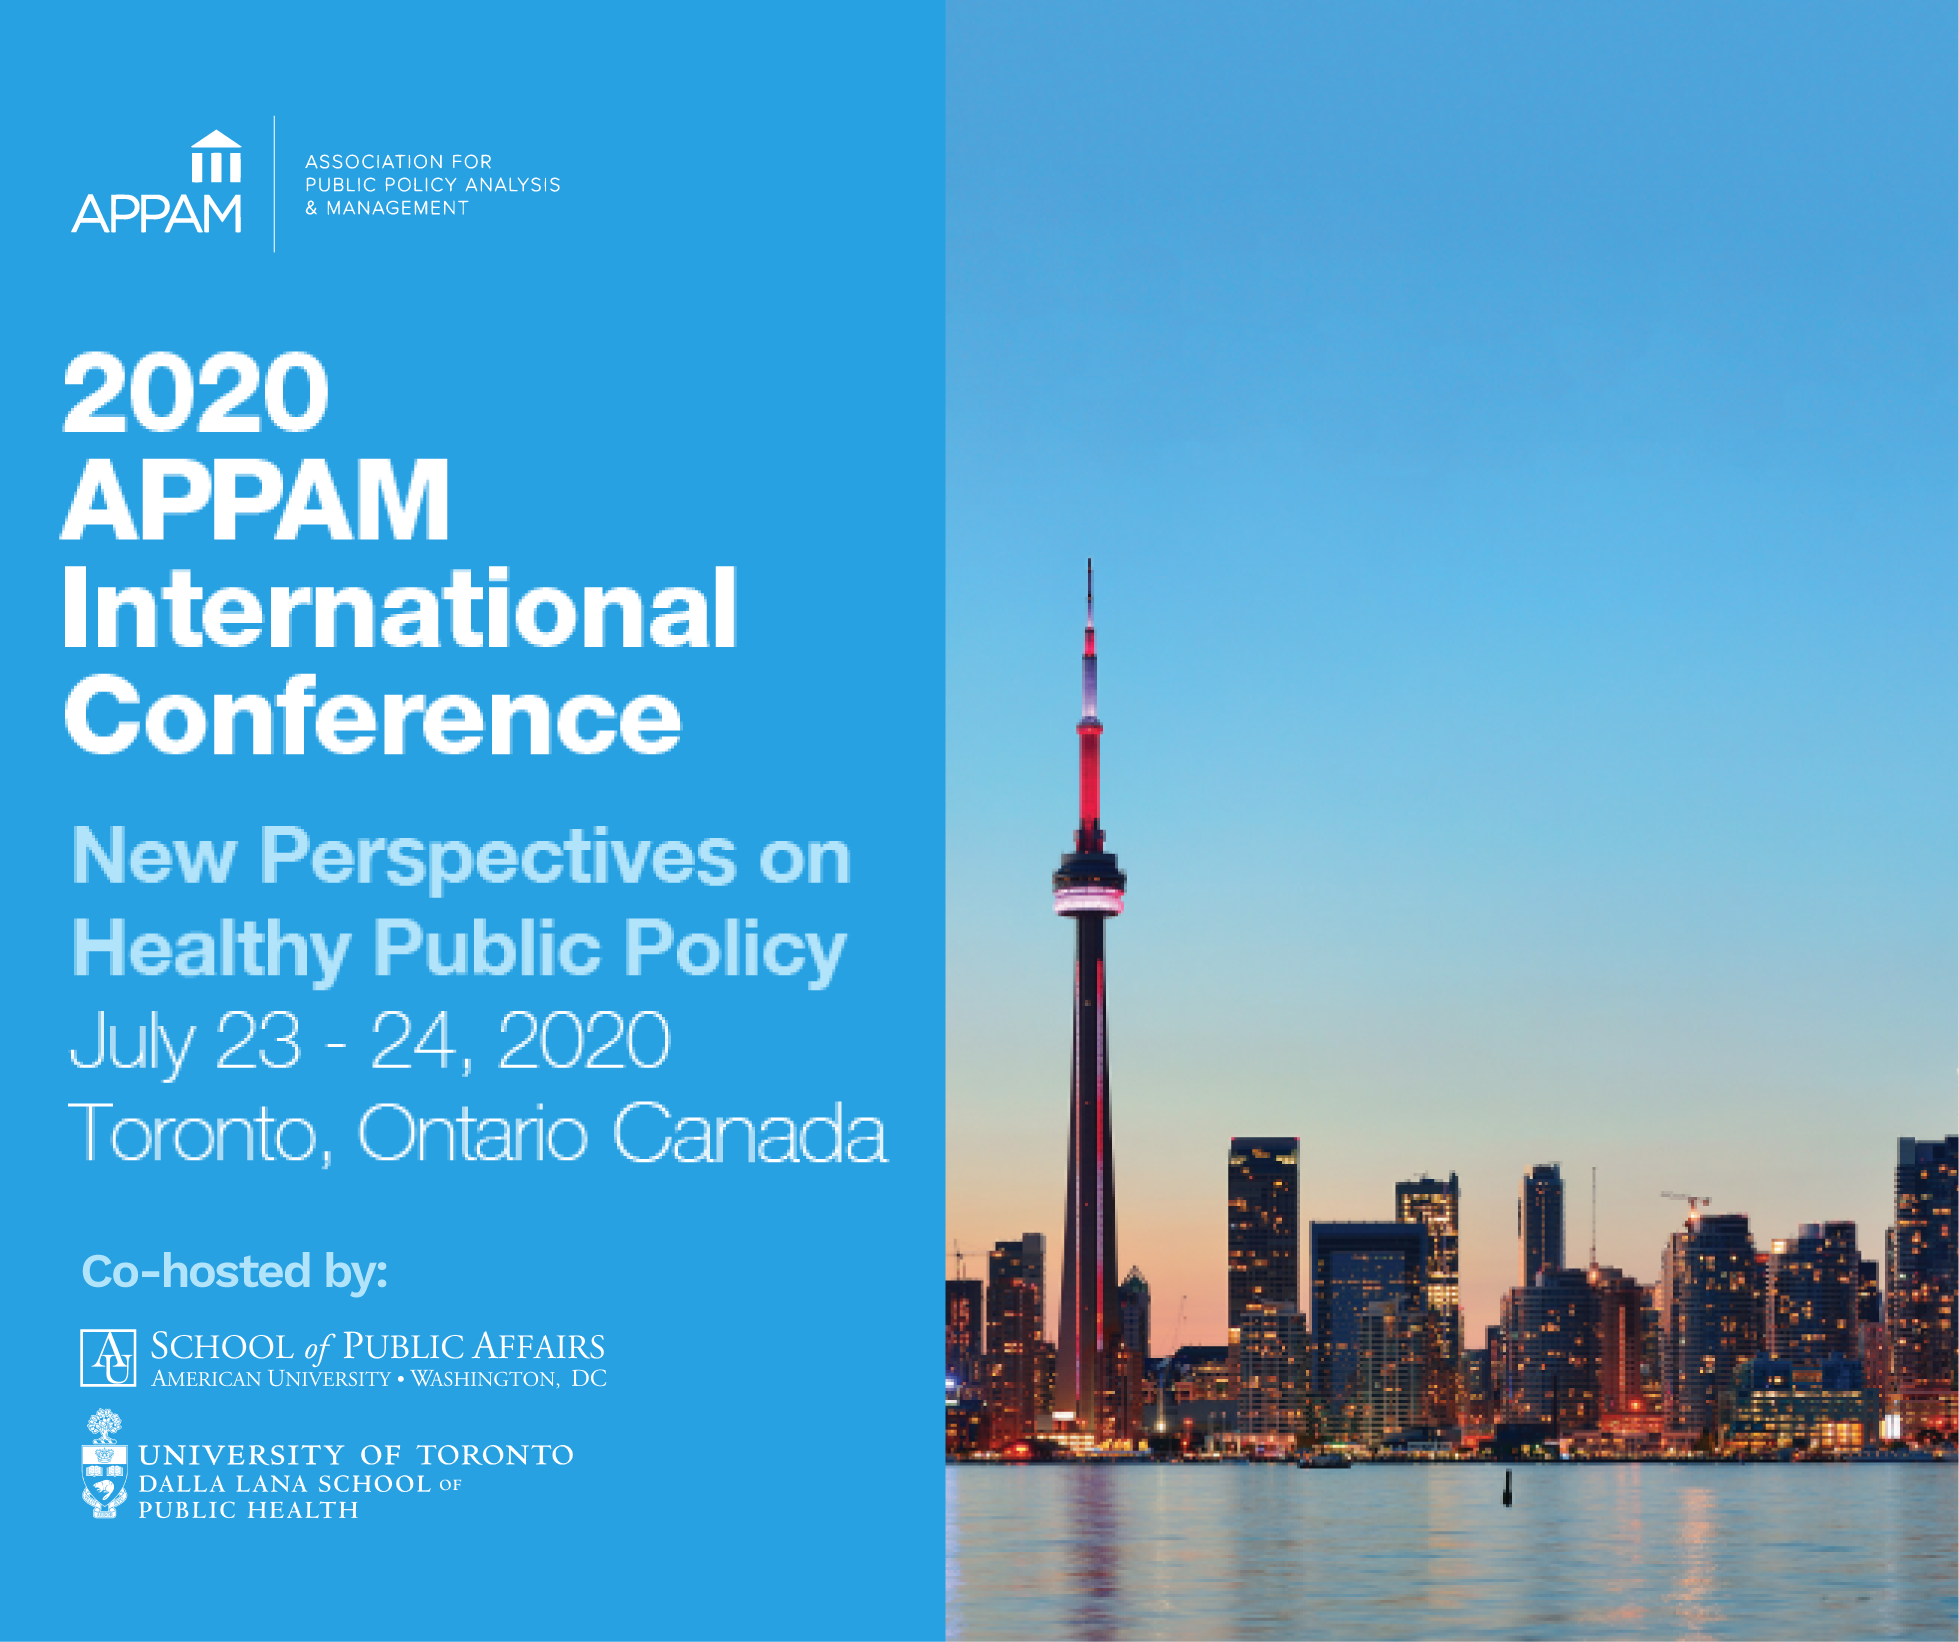 Major international public policy conference APPAM 2020, to be hosted